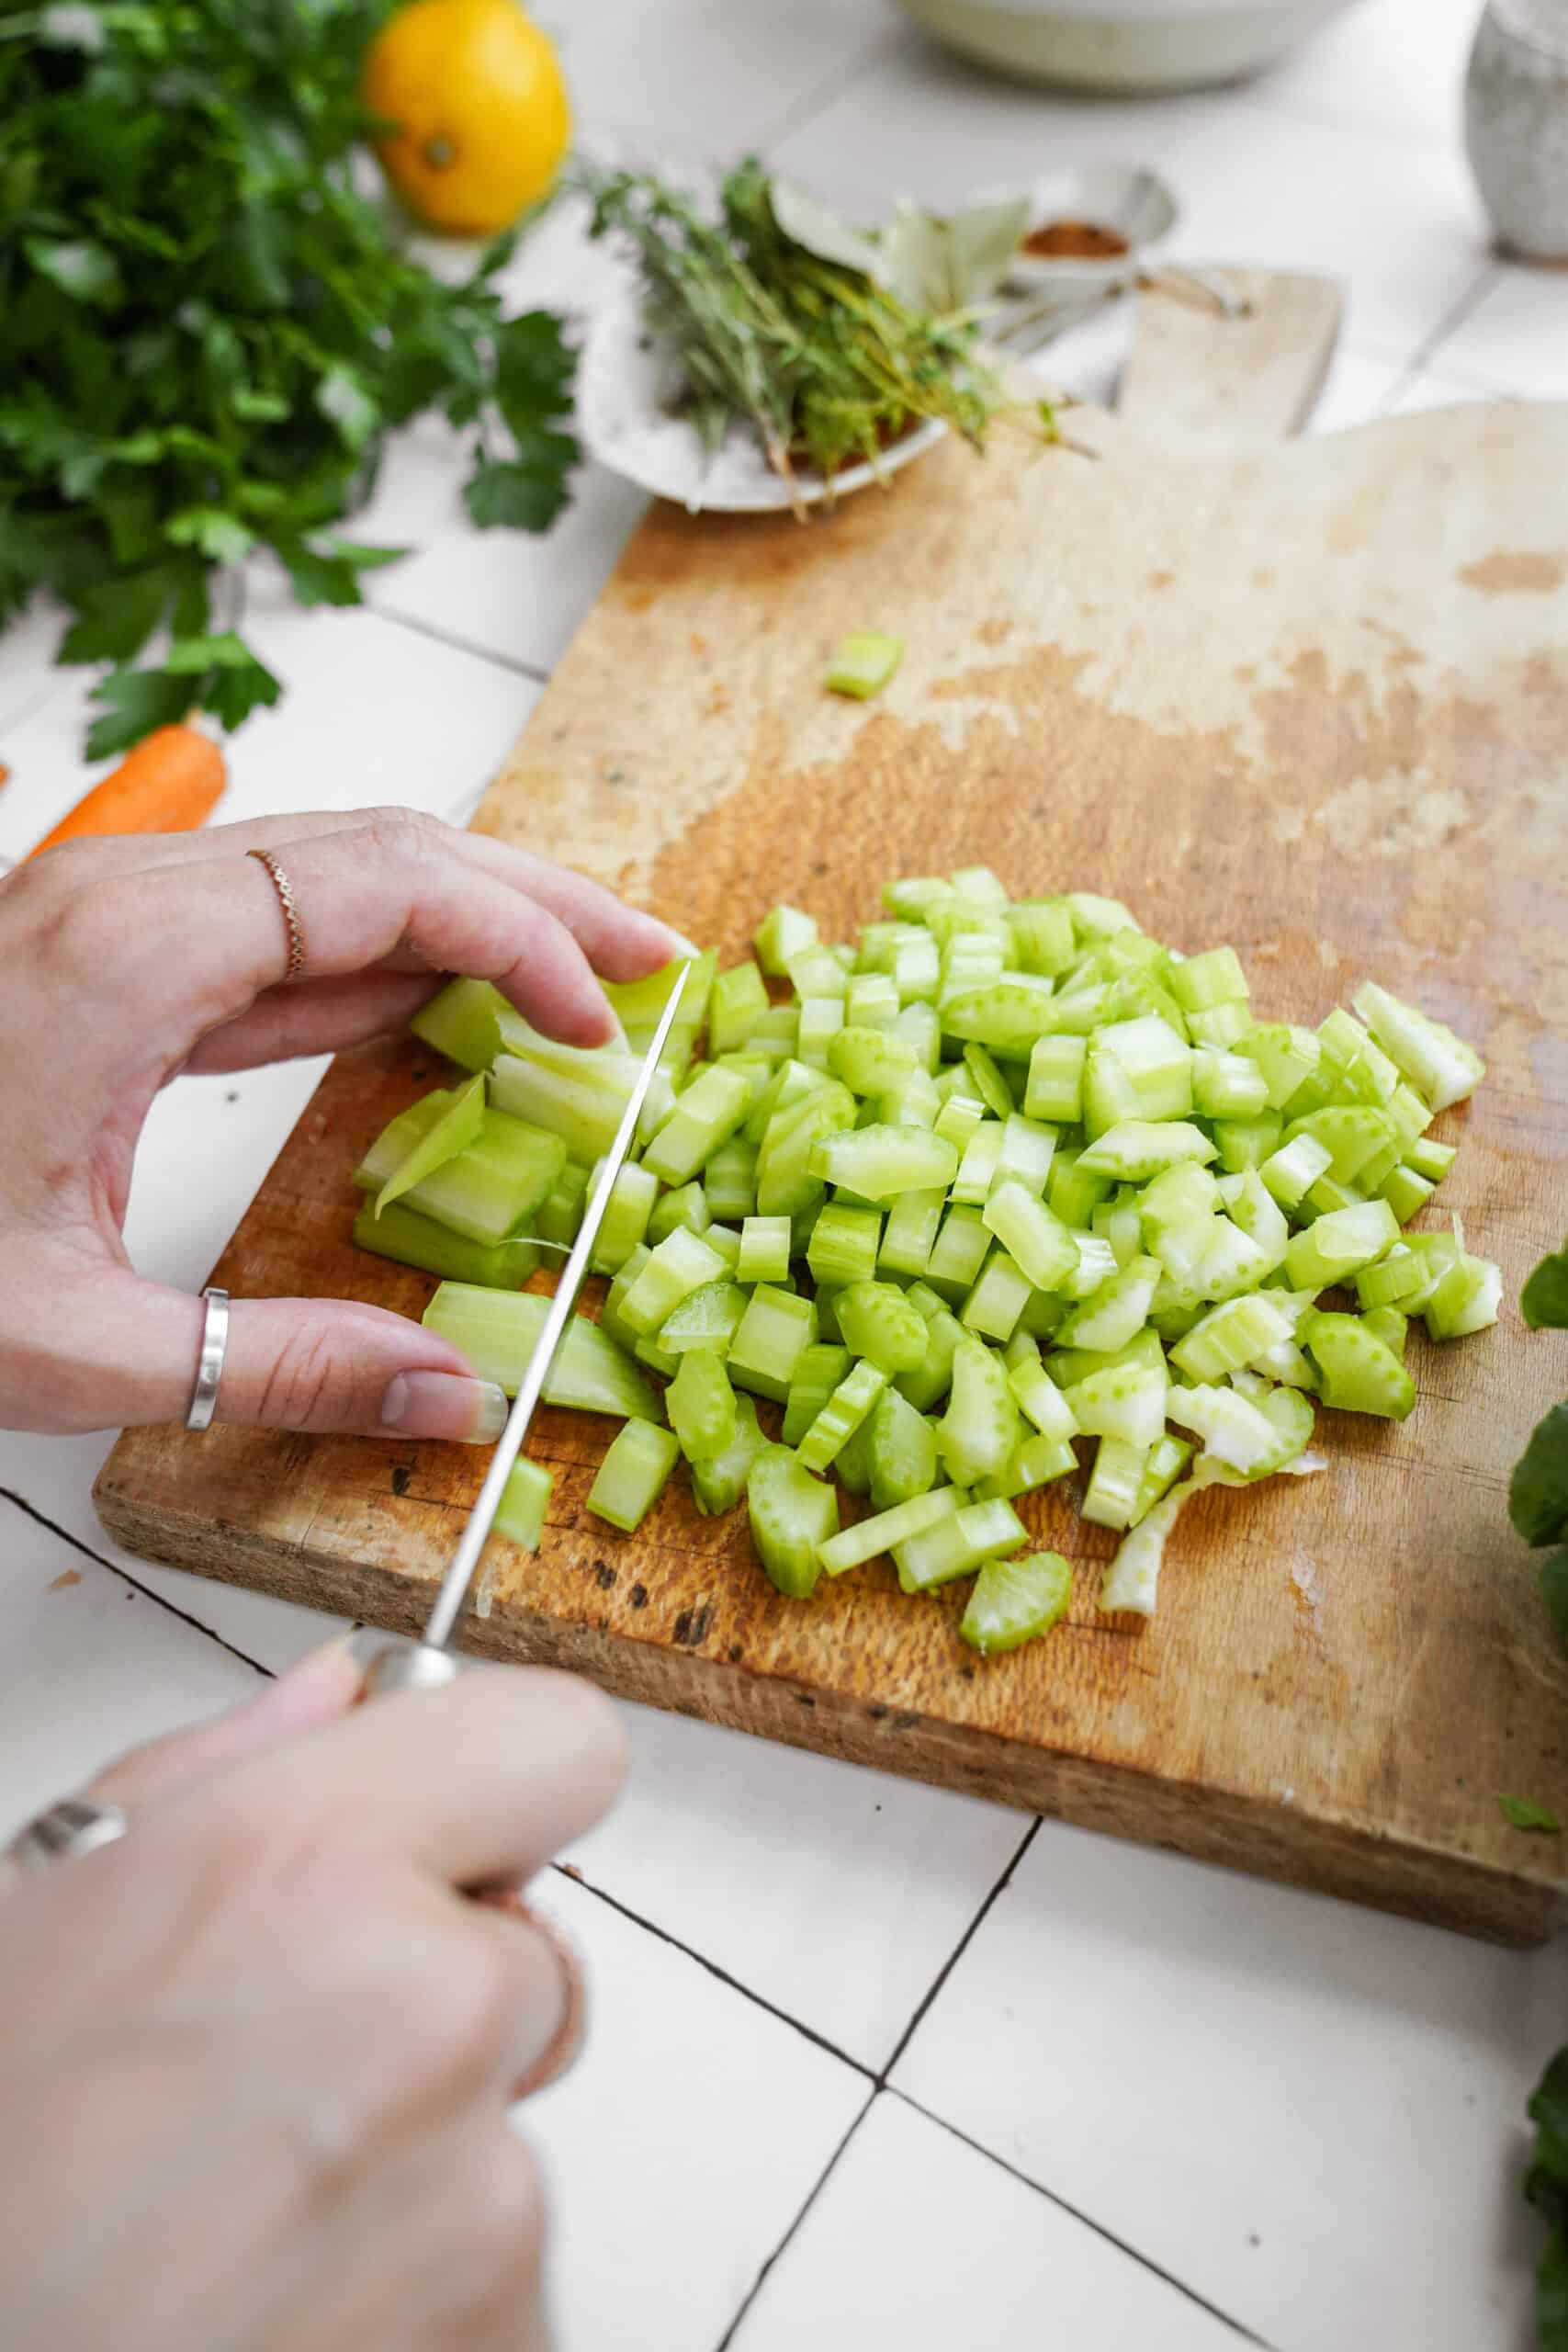 Hands chopping up celery on board